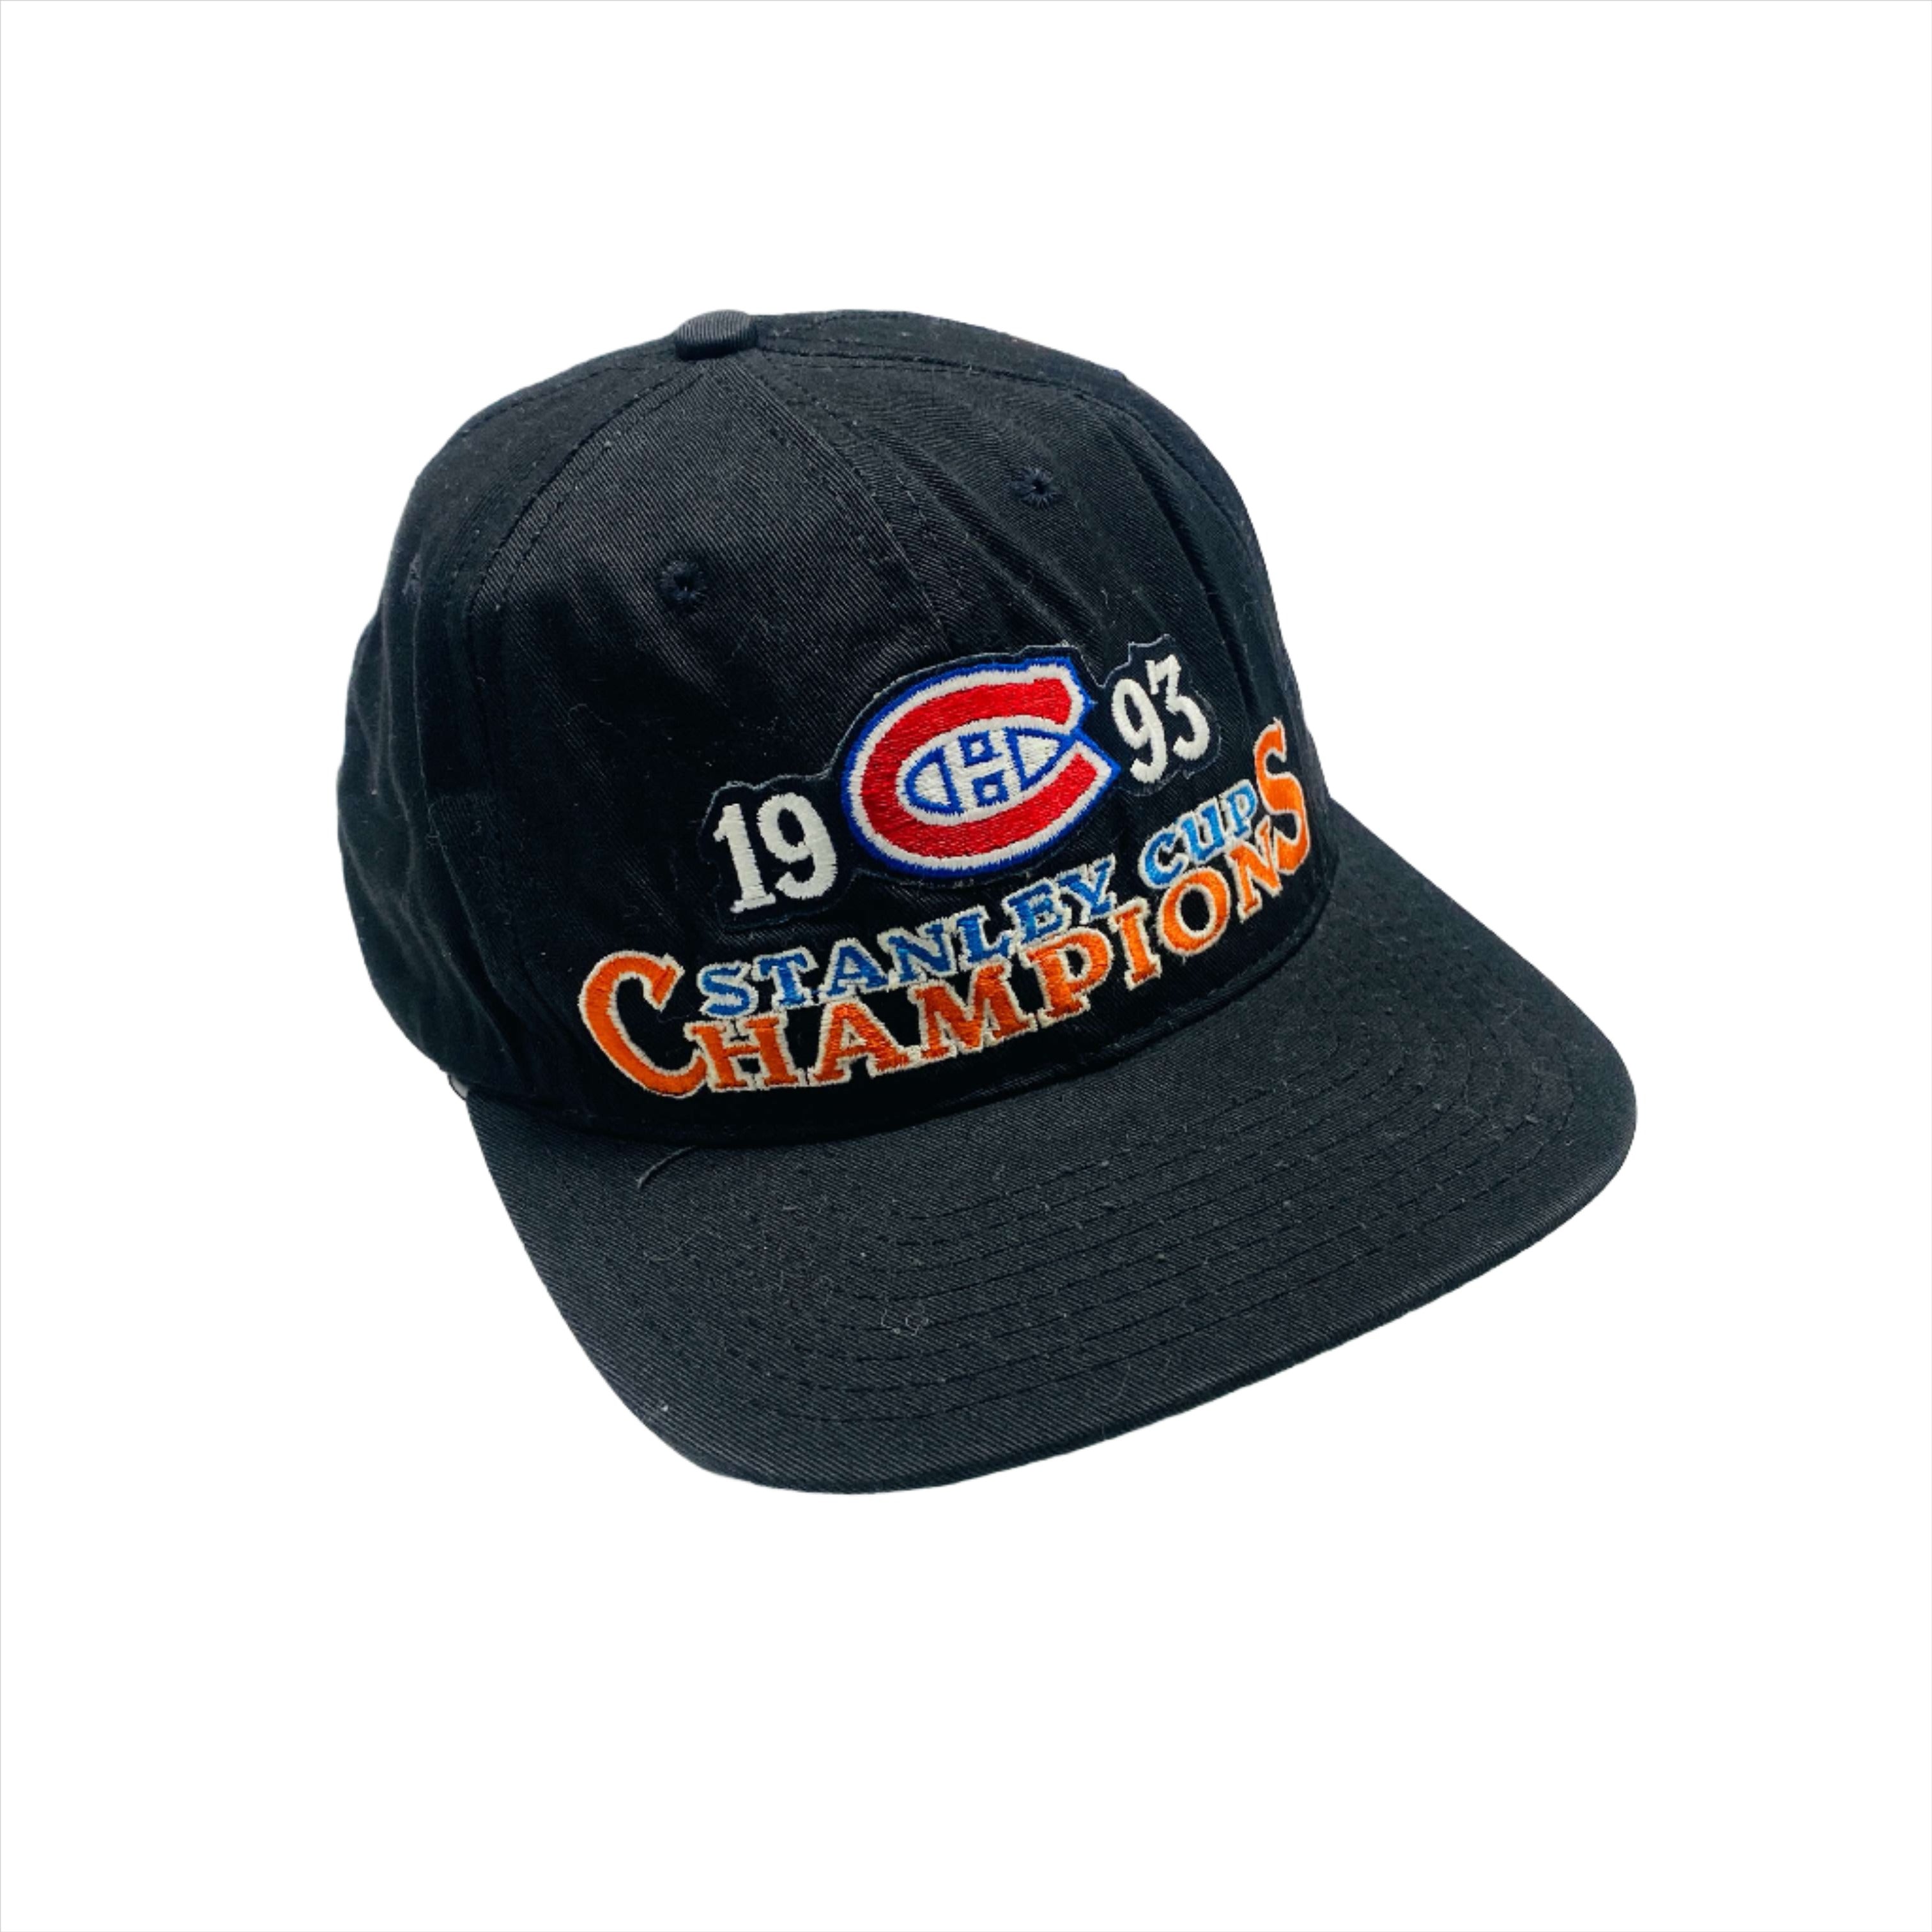 Montreal Canadiens NHL 1993 Stanley Cup Champions Snapback Cap